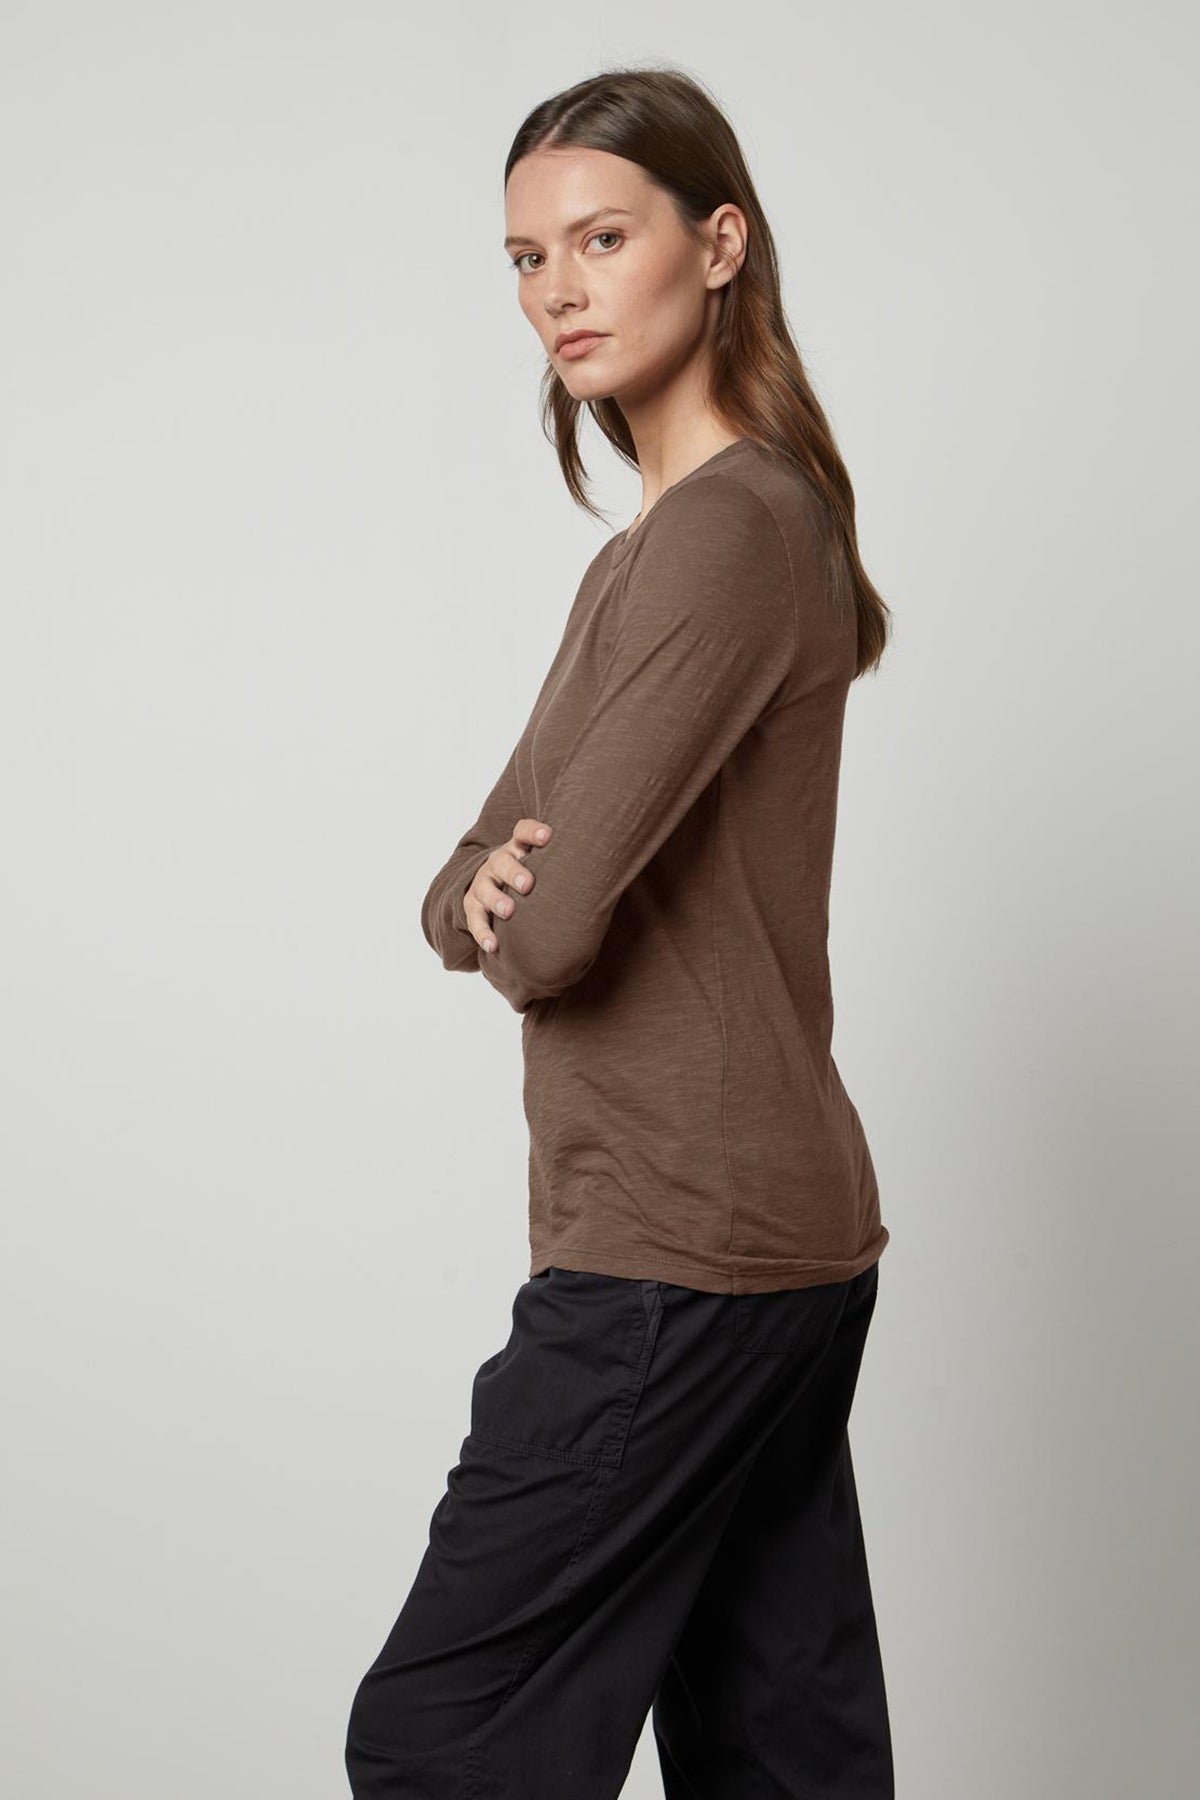 The model is wearing a Velvet by Graham & Spencer LIZZIE ORIGINAL SLUB LONG SLEEVE TEE made of cotton.-35782988562625